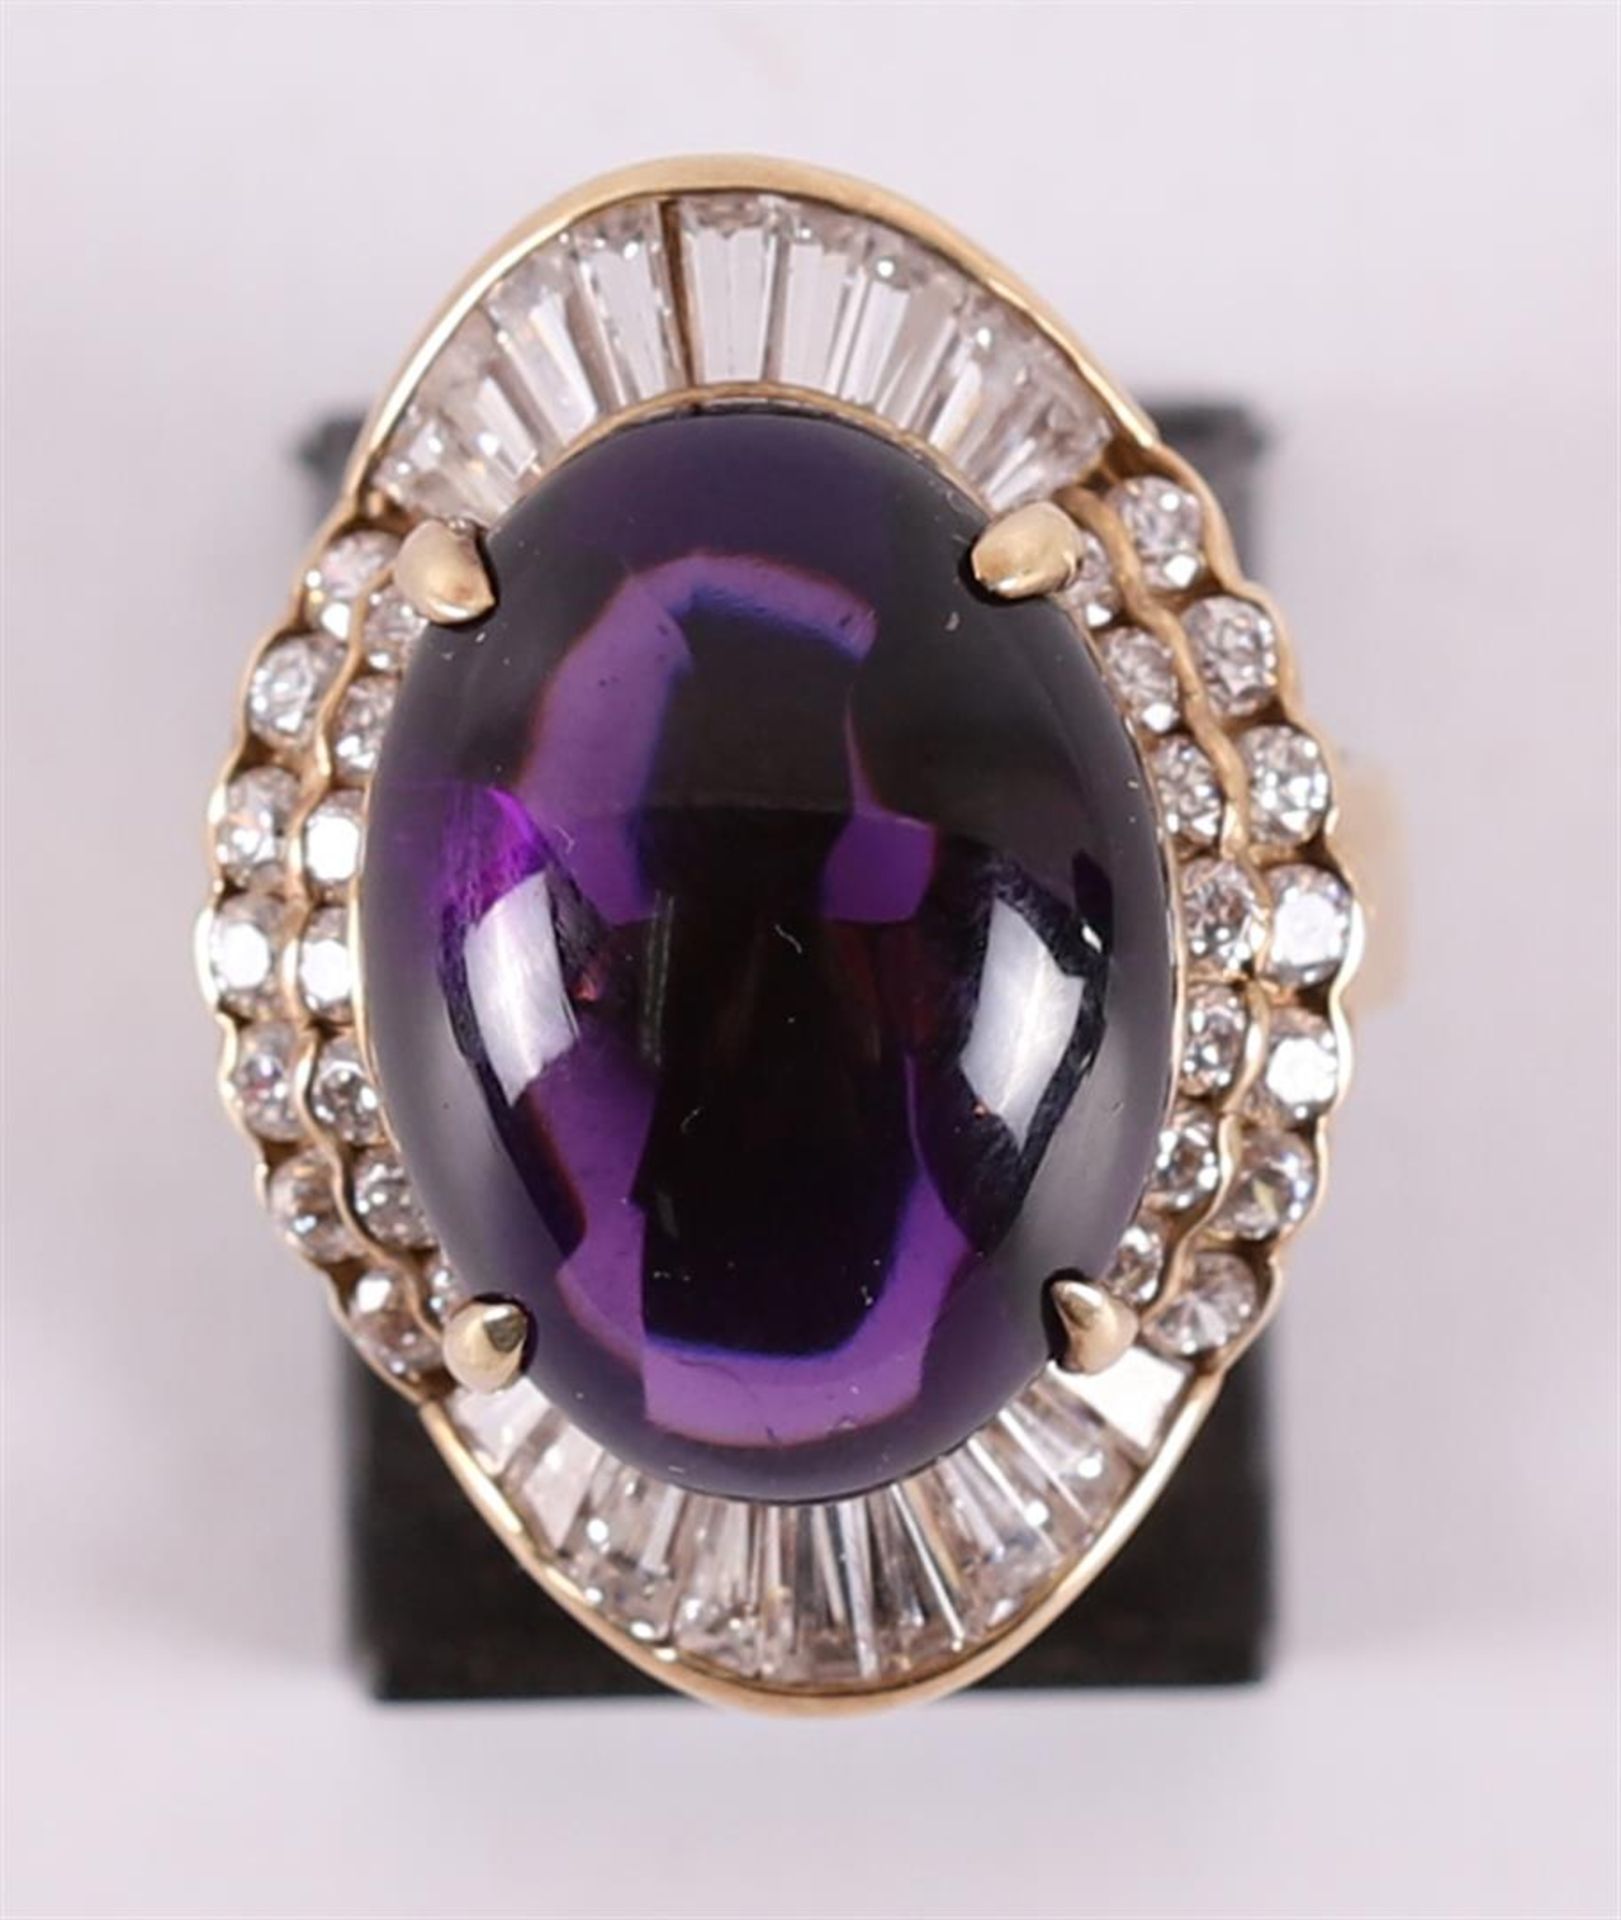 A 14 kt gold ring with a cabochon cut amethyst.